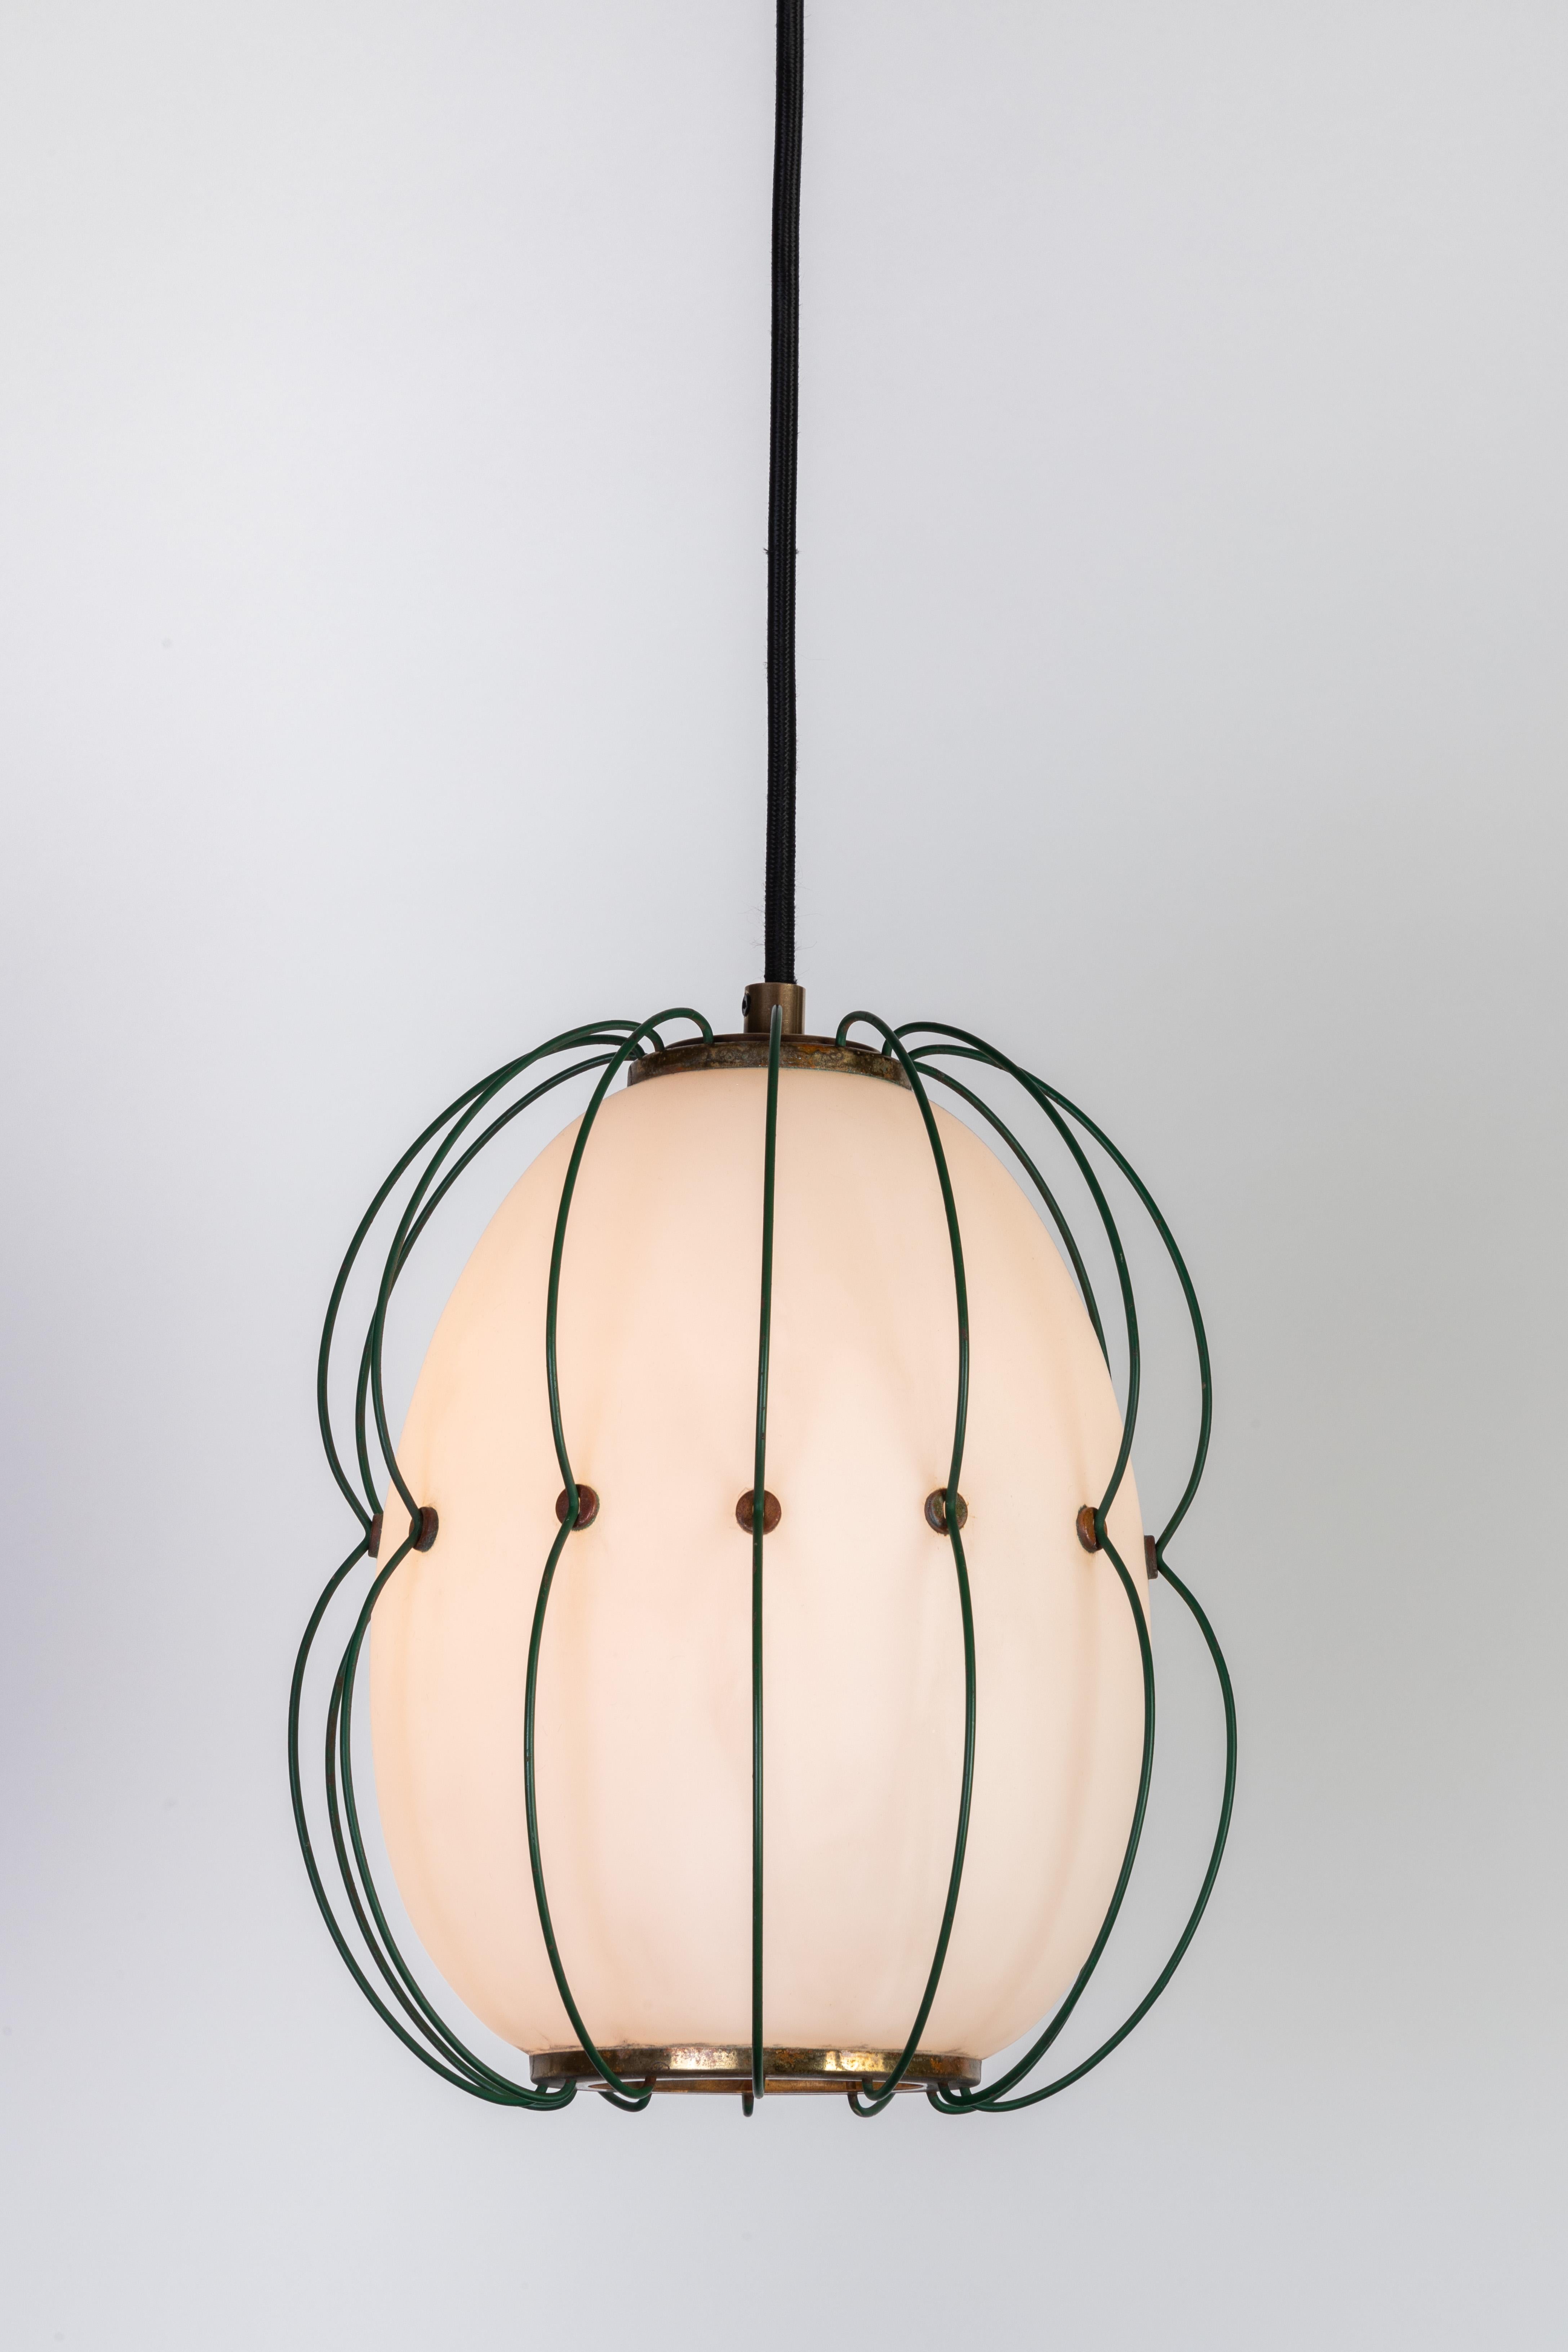 Metal 1950s Suspension Light Attributed to Angelo Lelli for Arredoluce